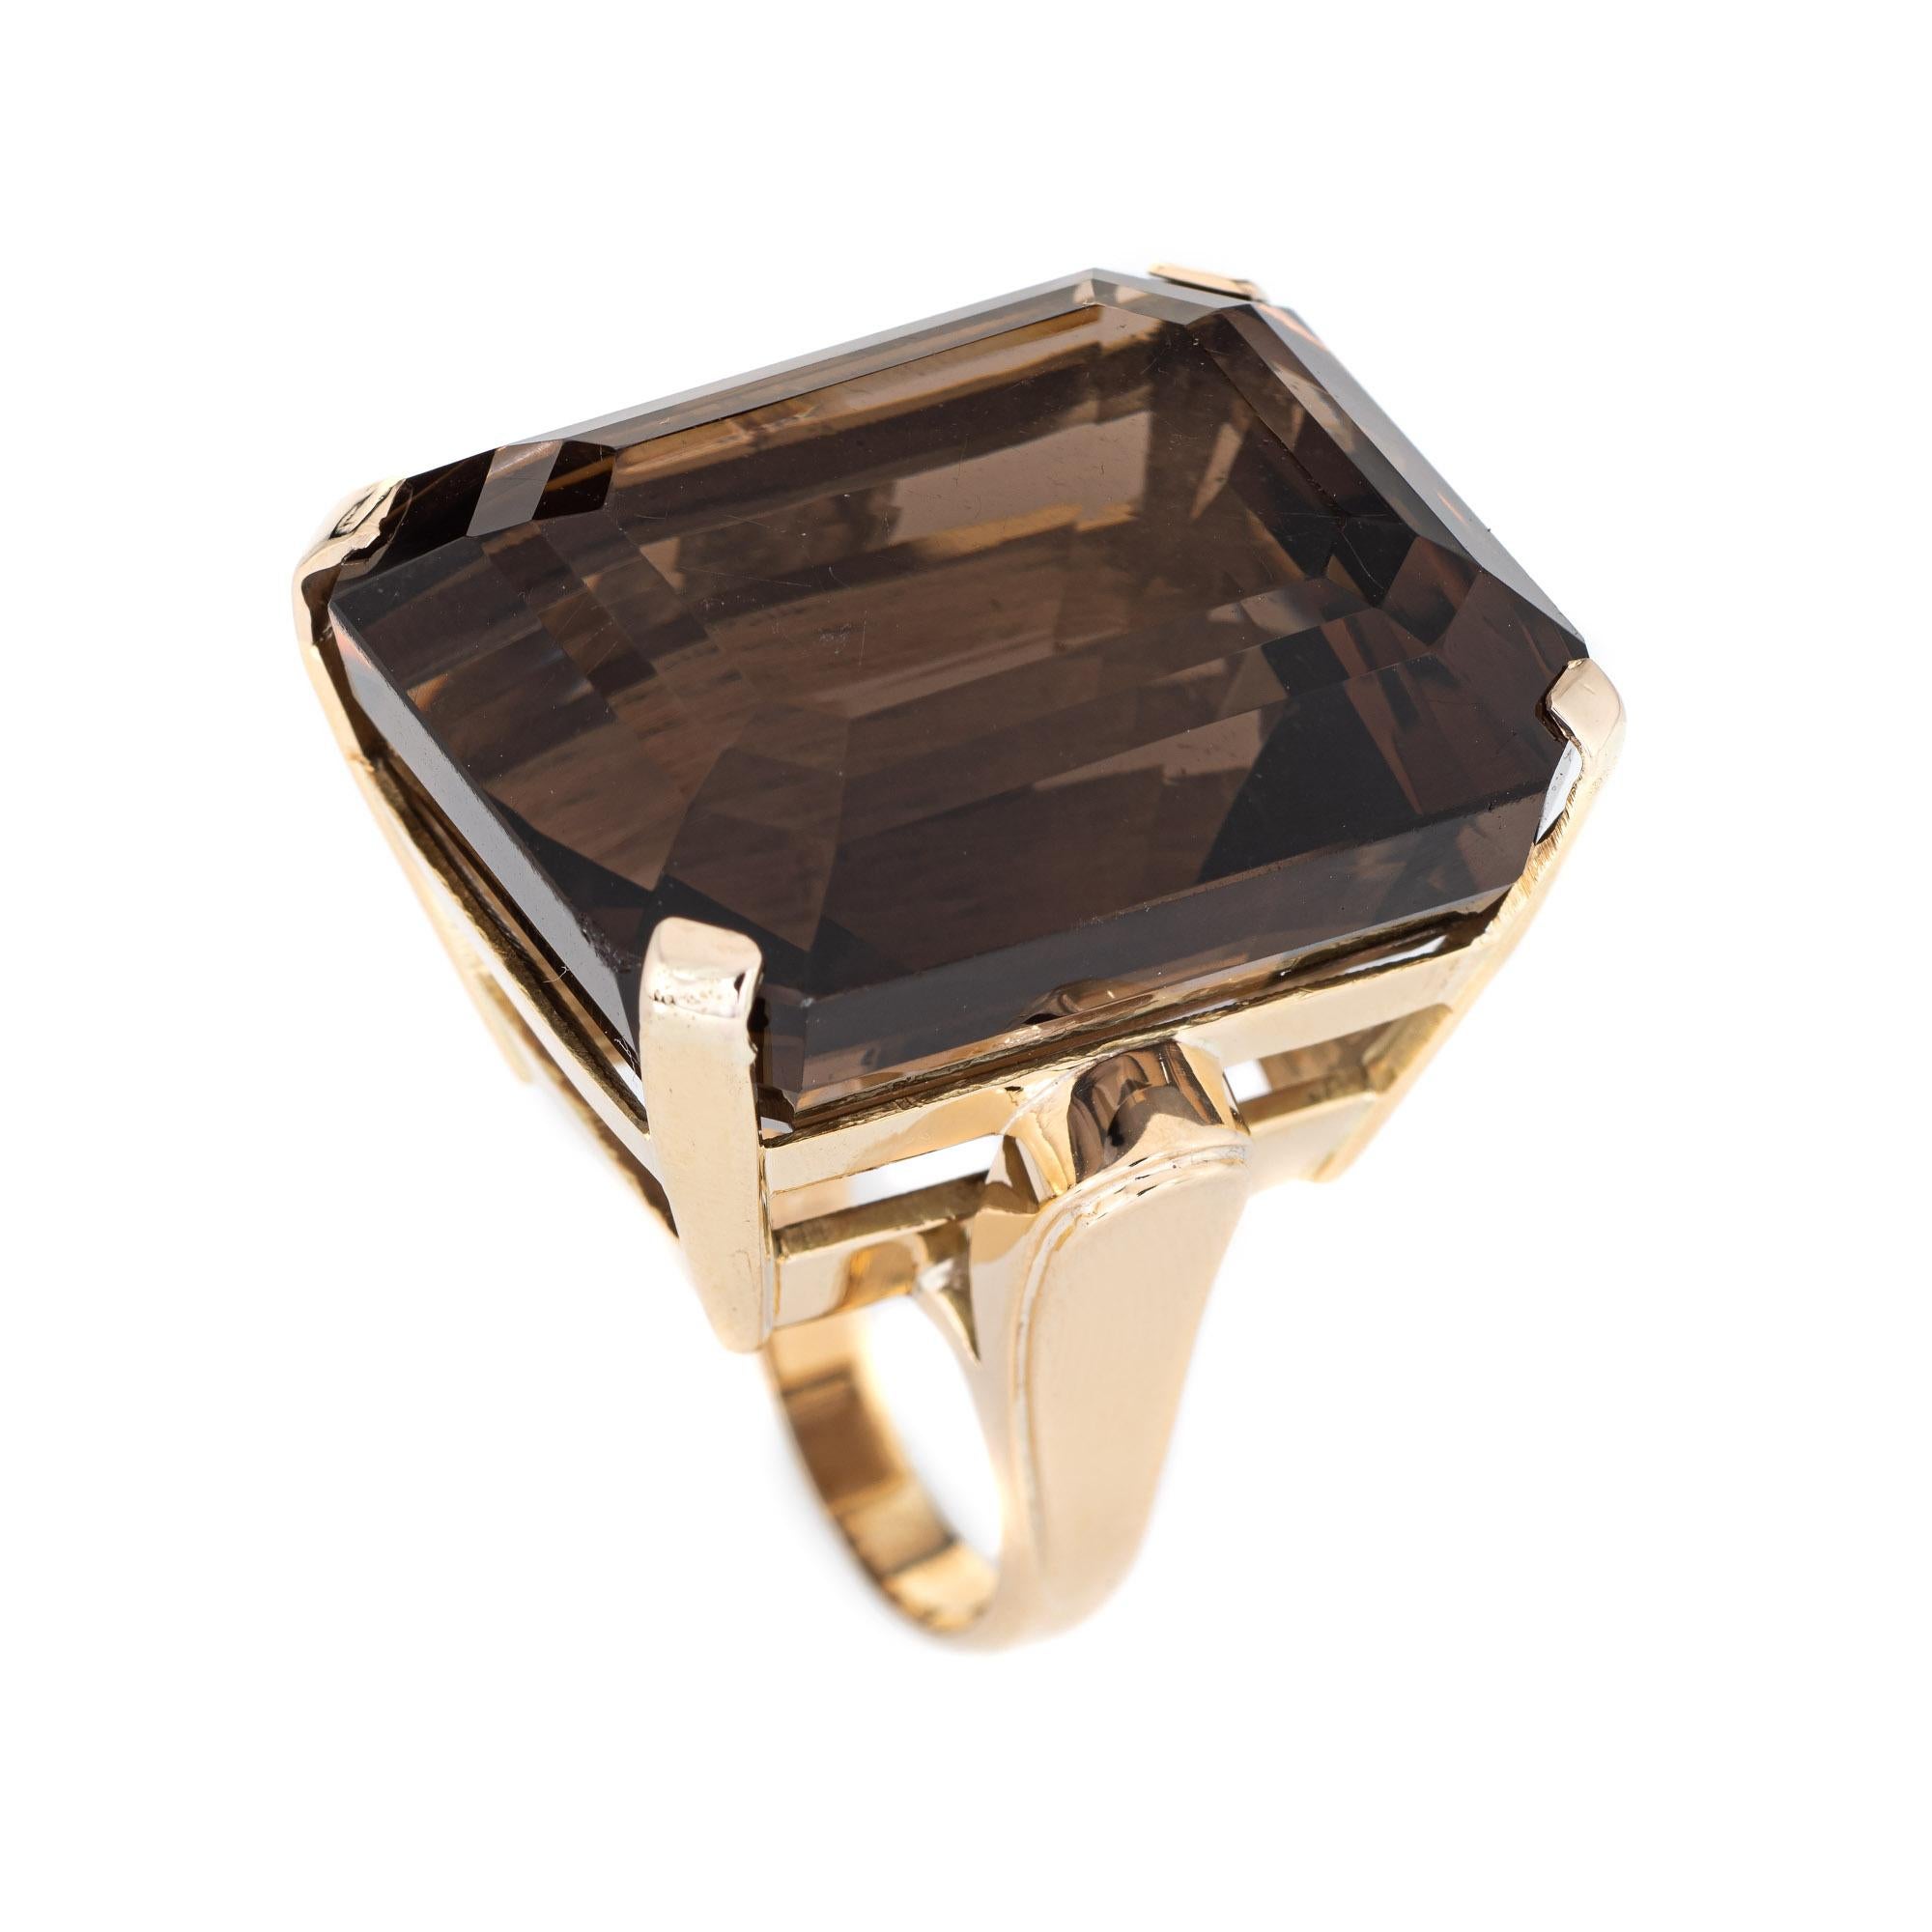 Stylish large estimated 93 carat smokey topaz cocktail ring (circa 1950s to 1960s) crafted in 14 karat yellow gold. 

Emerald cut smokey quartz measures 29.5mm x 24mm (estimated at 93 carats). The quartz is in very good condition and free of cracks